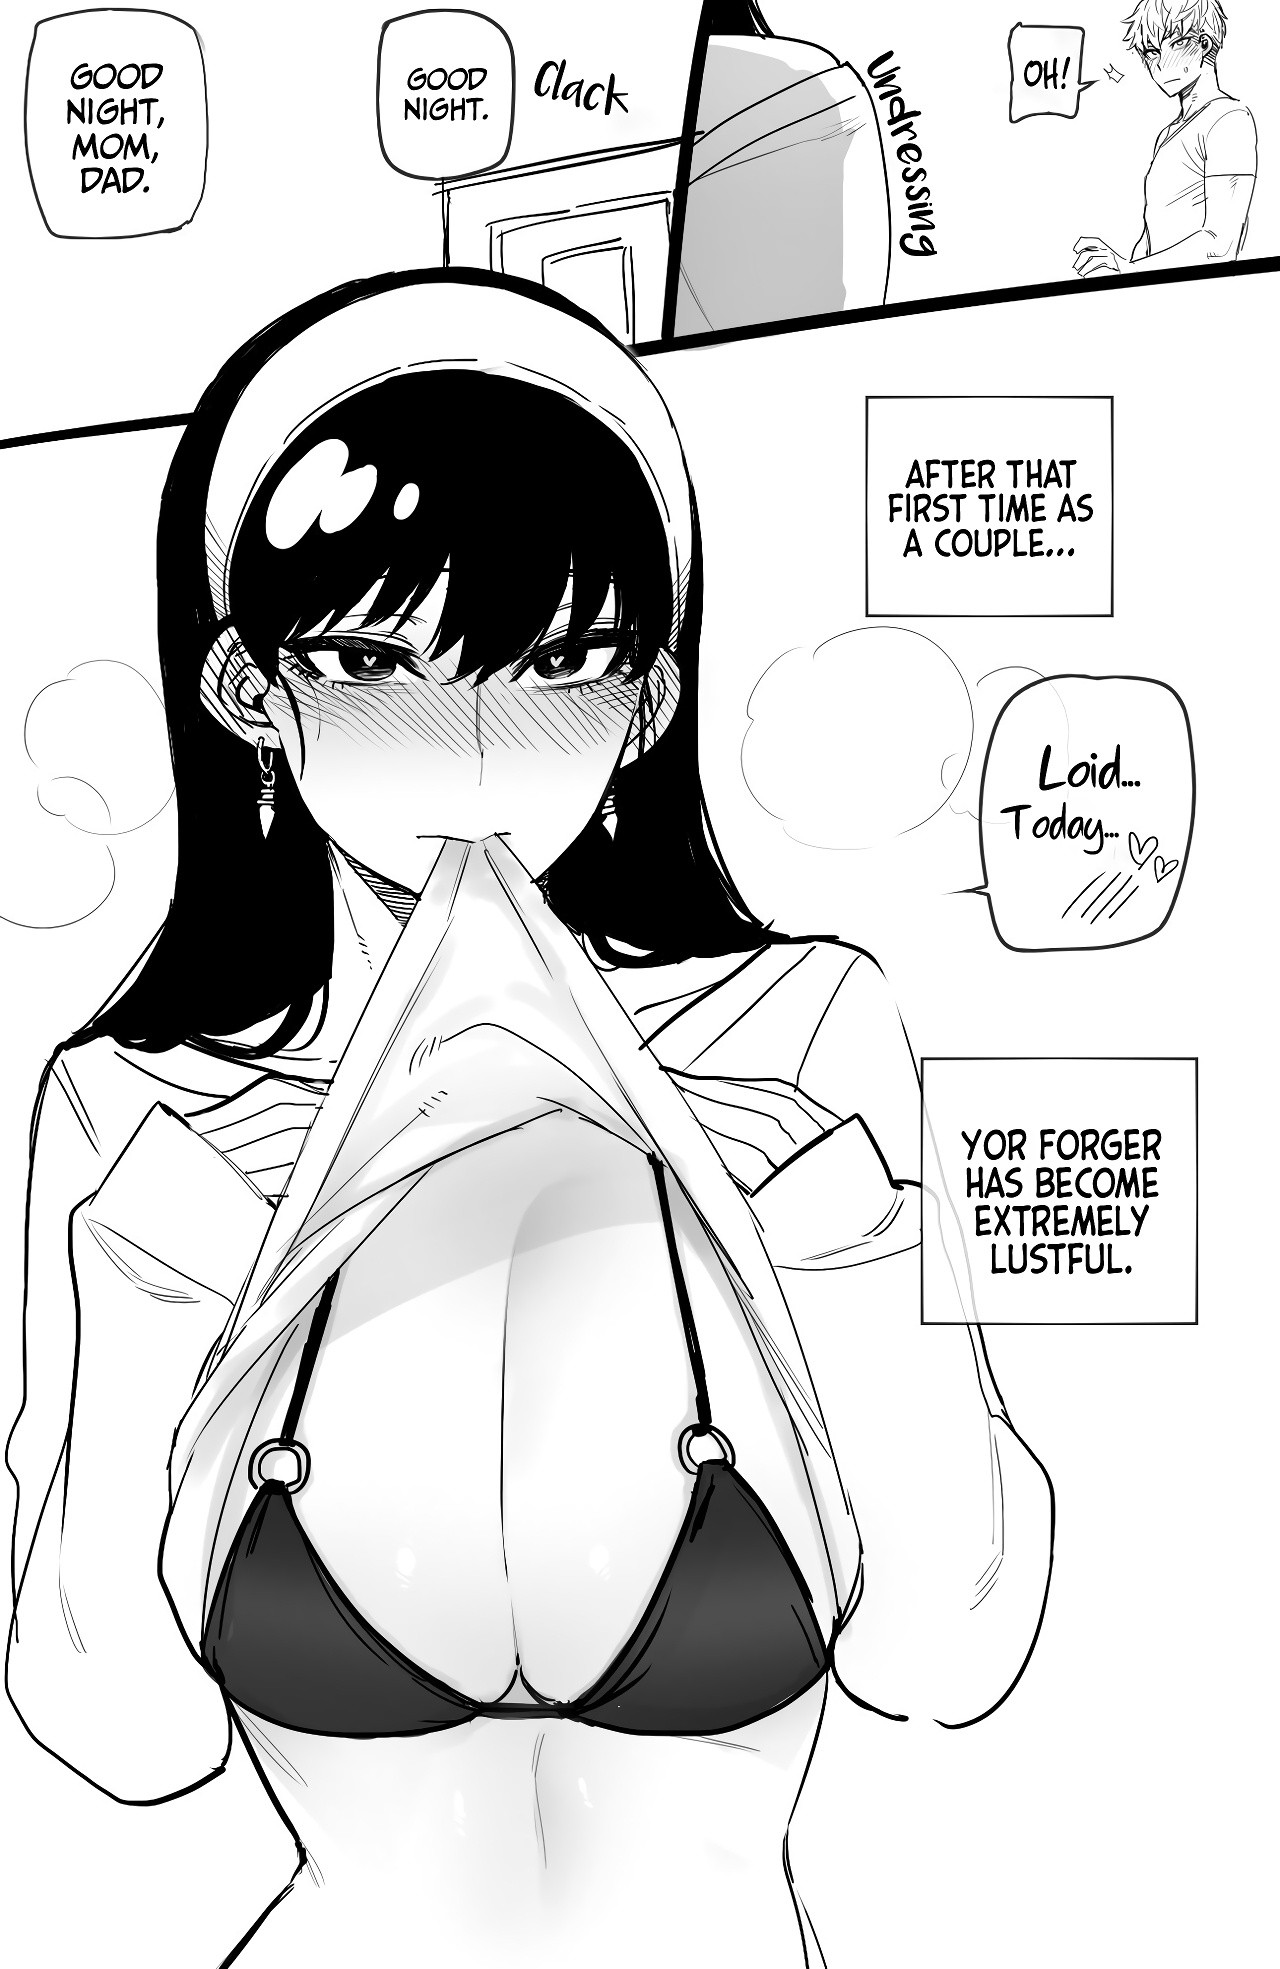 Spy x Sex - After Story hentai manga picture 3